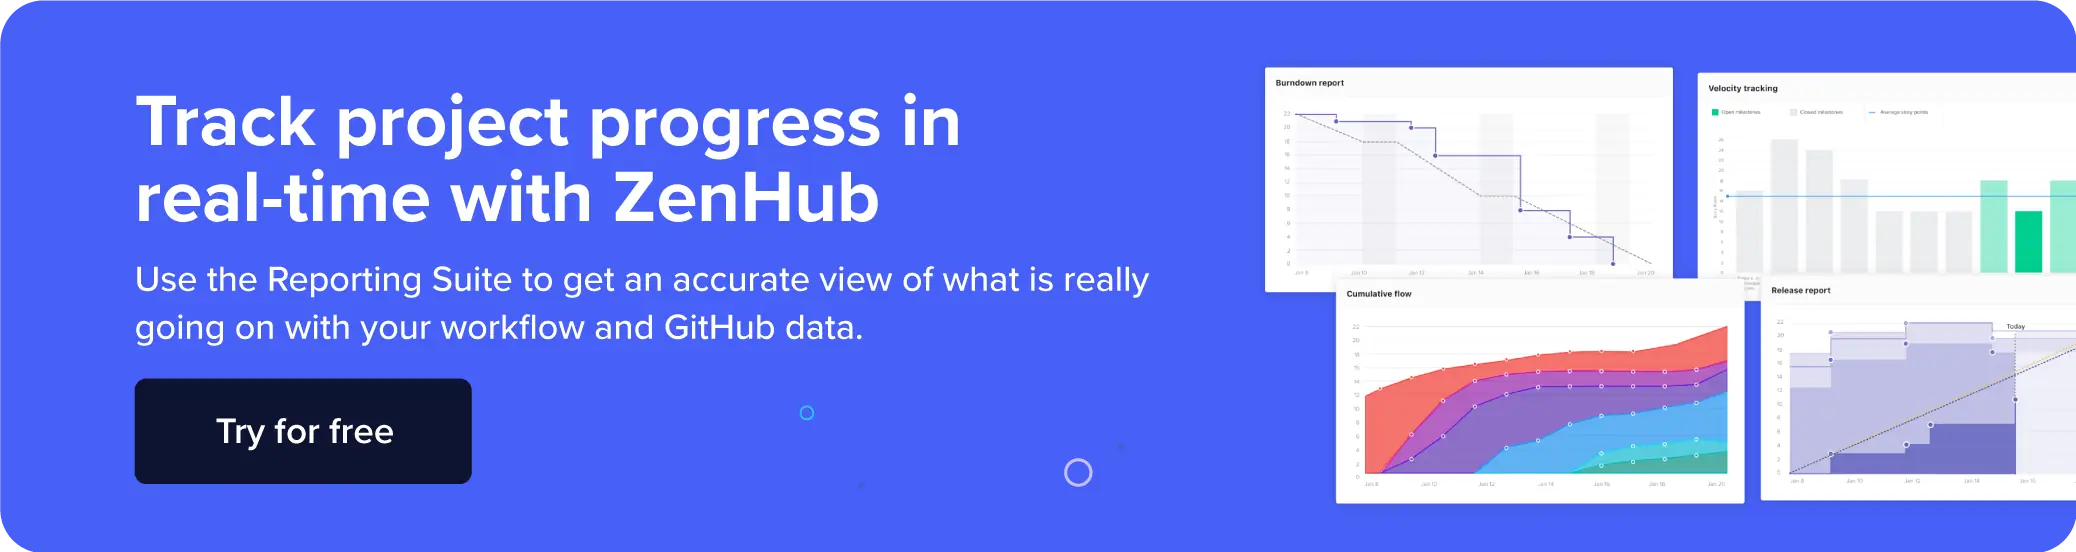 Describes how to use ZenHub's Reporting Suite to get an accurate view of what's going on with your workflow and GitHub data.